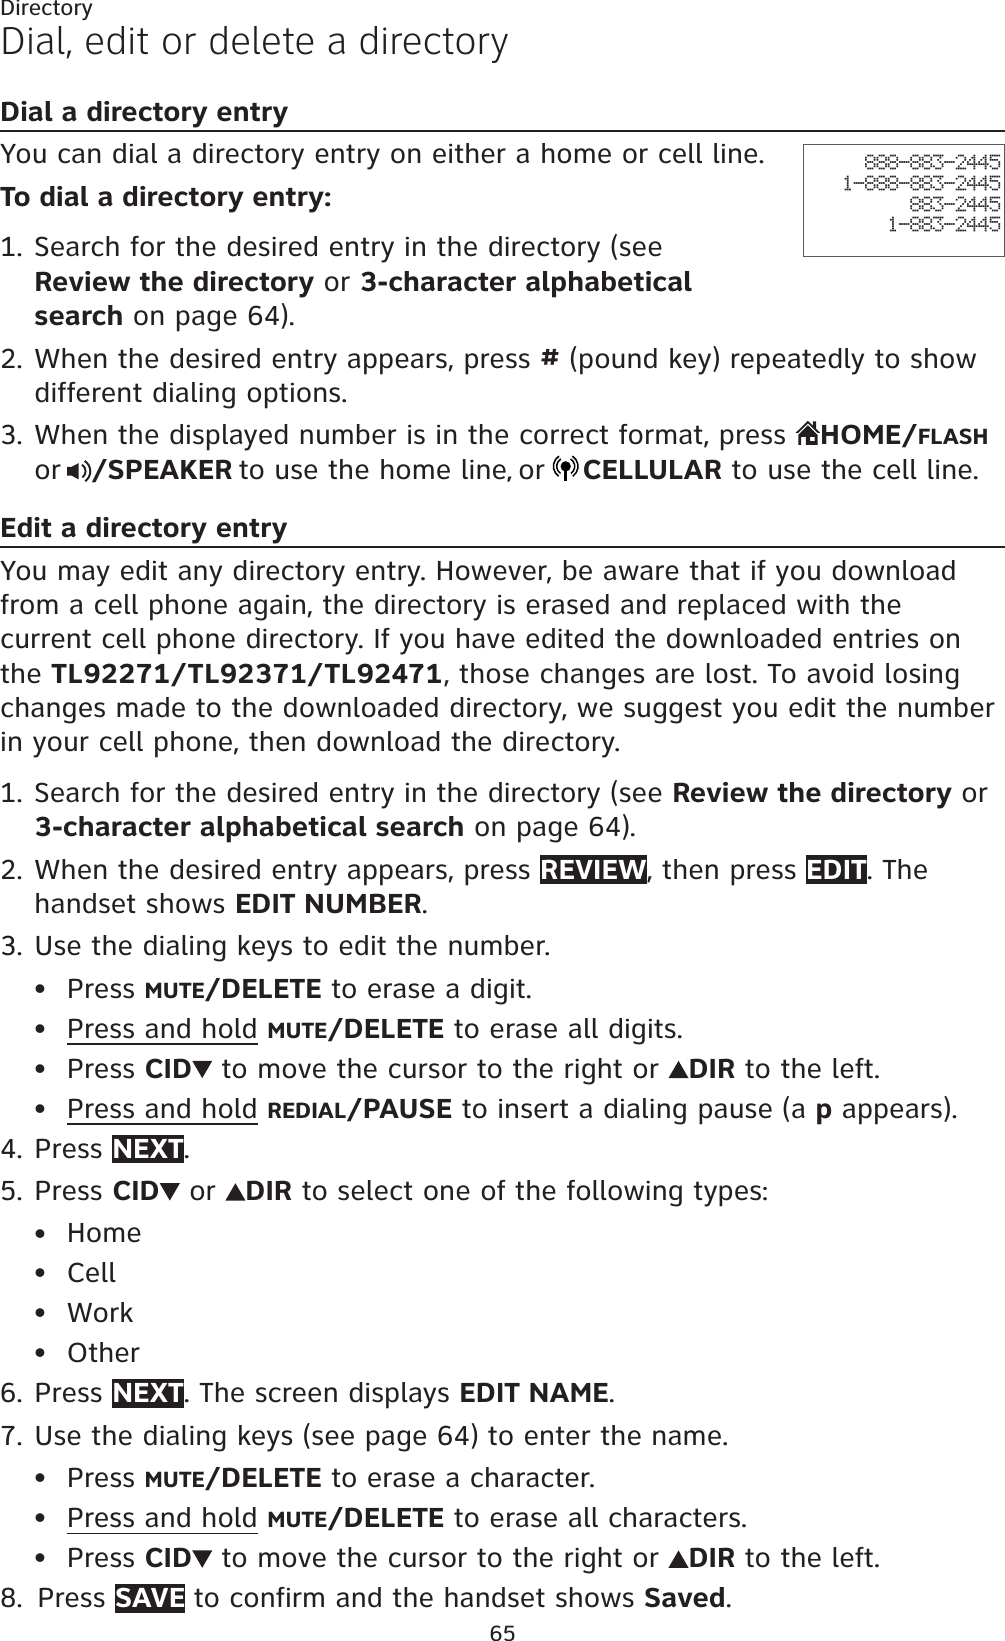 65DirectoryDial, edit or delete a directoryDial a directory entryYou can dial a directory entry on either a home or cell line.To dial a directory entry:Search for the desired entry in the directory (see Review the directory or 3-character alphabetical search on page 64).When the desired entry appears, press # (pound key) repeatedly to show different dialing options.When the displayed number is in the correct format, press  HOME/FLASHor /SPEAKER to use the home line,or CELLULAR to use the cell line.Edit a directory entryYou may edit any directory entry. However, be aware that if you download from a cell phone again, the directory is erased and replaced with the current cell phone directory. If you have edited the downloaded entries on the TL92271/TL92371/TL92471, those changes are lost. To avoid losing changes made to the downloaded directory, we suggest you edit the number in your cell phone, then download the directory.Search for the desired entry in the directory (see Review the directory or 3-character alphabetical search on page 64).When the desired entry appears, press REVIEW, then press EDIT. The handset shows EDIT NUMBER.Use the dialing keys to edit the number.Press MUTE/DELETE to erase a digit.Press and hold MUTE/DELETE to erase all digits.Press CID  to move the cursor to the right or  DIR to the left.Press and hold REDIAL/PAUSE to insert a dialing pause (a p appears).Press NEXT.Press CID  or  DIR to select one of the following types:HomeCellWorkOtherPress NEXT. The screen displays EDIT NAME.Use the dialing keys (see page 64) to enter the name. Press MUTE/DELETE to erase a character.Press and hold MUTE/DELETE to erase all characters.Press CID  to move the cursor to the right or DIR to the left.Press SAVE to confirm and the handset shows Saved.1.2.3.1.2.3.••••4.5.••••6.7.•••8.888-883-24451-888-883-2445883-24451-883-2445